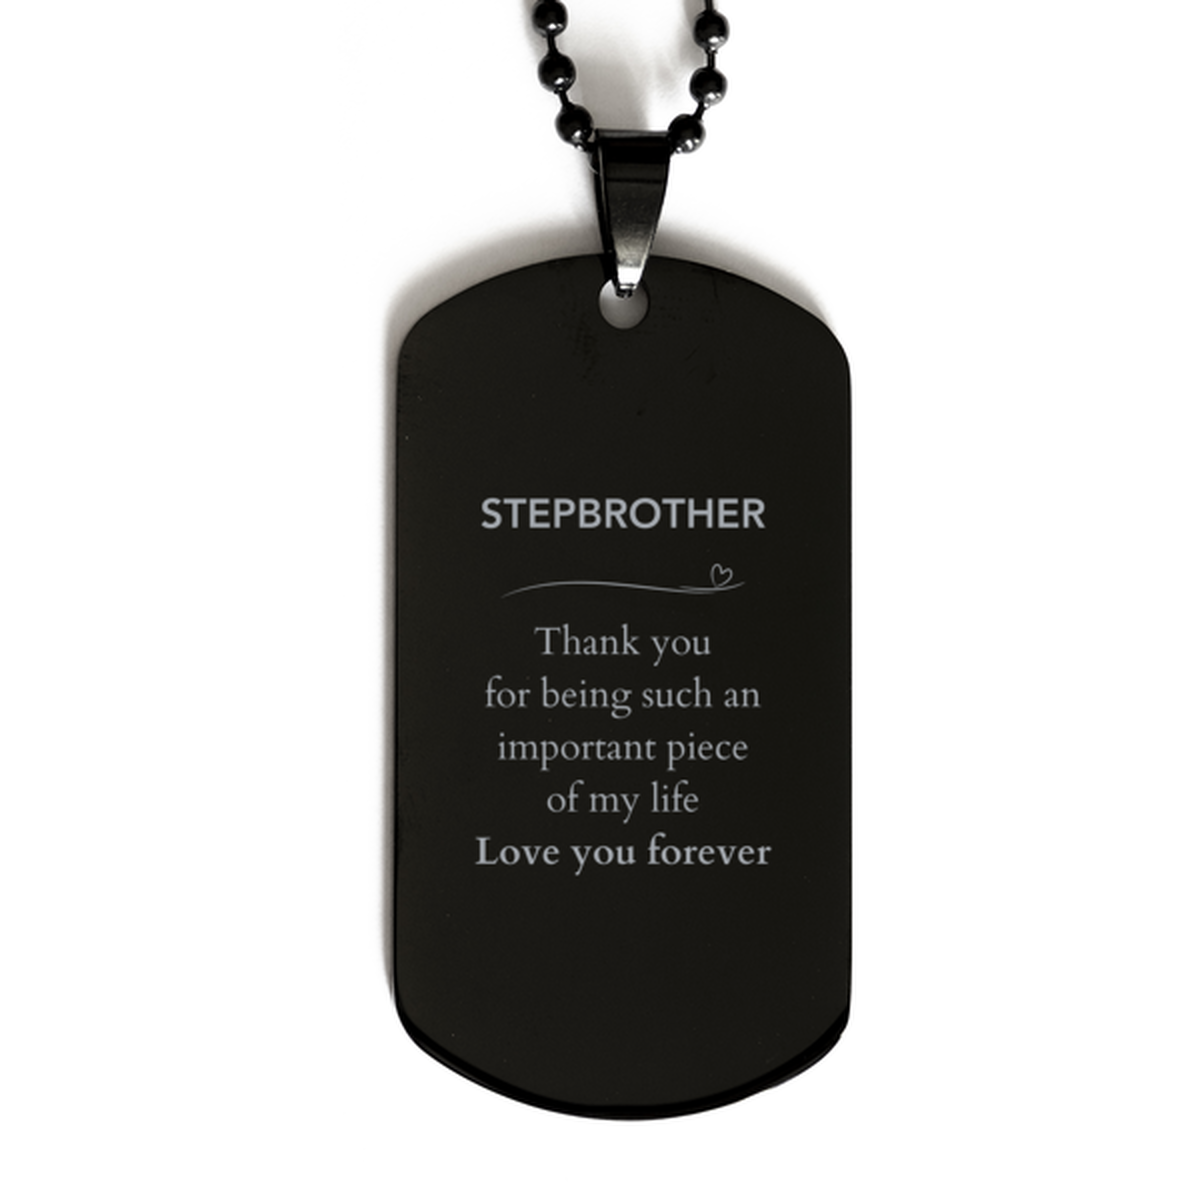 Appropriate Stepbrother Black Dog Tag Epic Birthday Gifts for Stepbrother Thank you for being such an important piece of my life Stepbrother Christmas Mothers Fathers Day